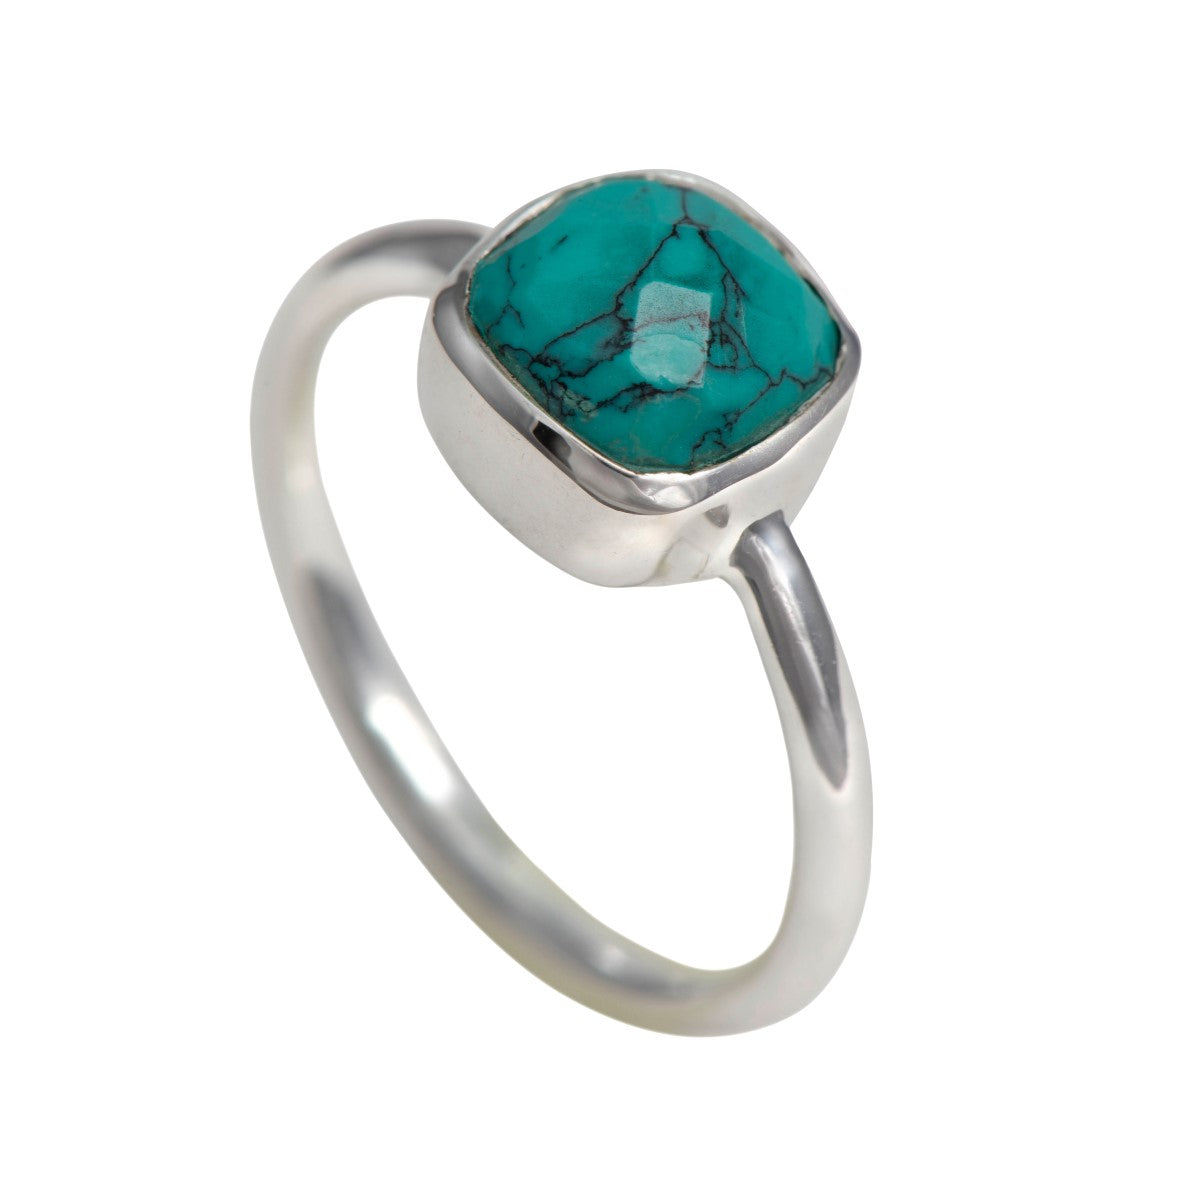 Faceted Square Cut Natural Gemstone Sterling Silver Solitaire Ring - Turquoise